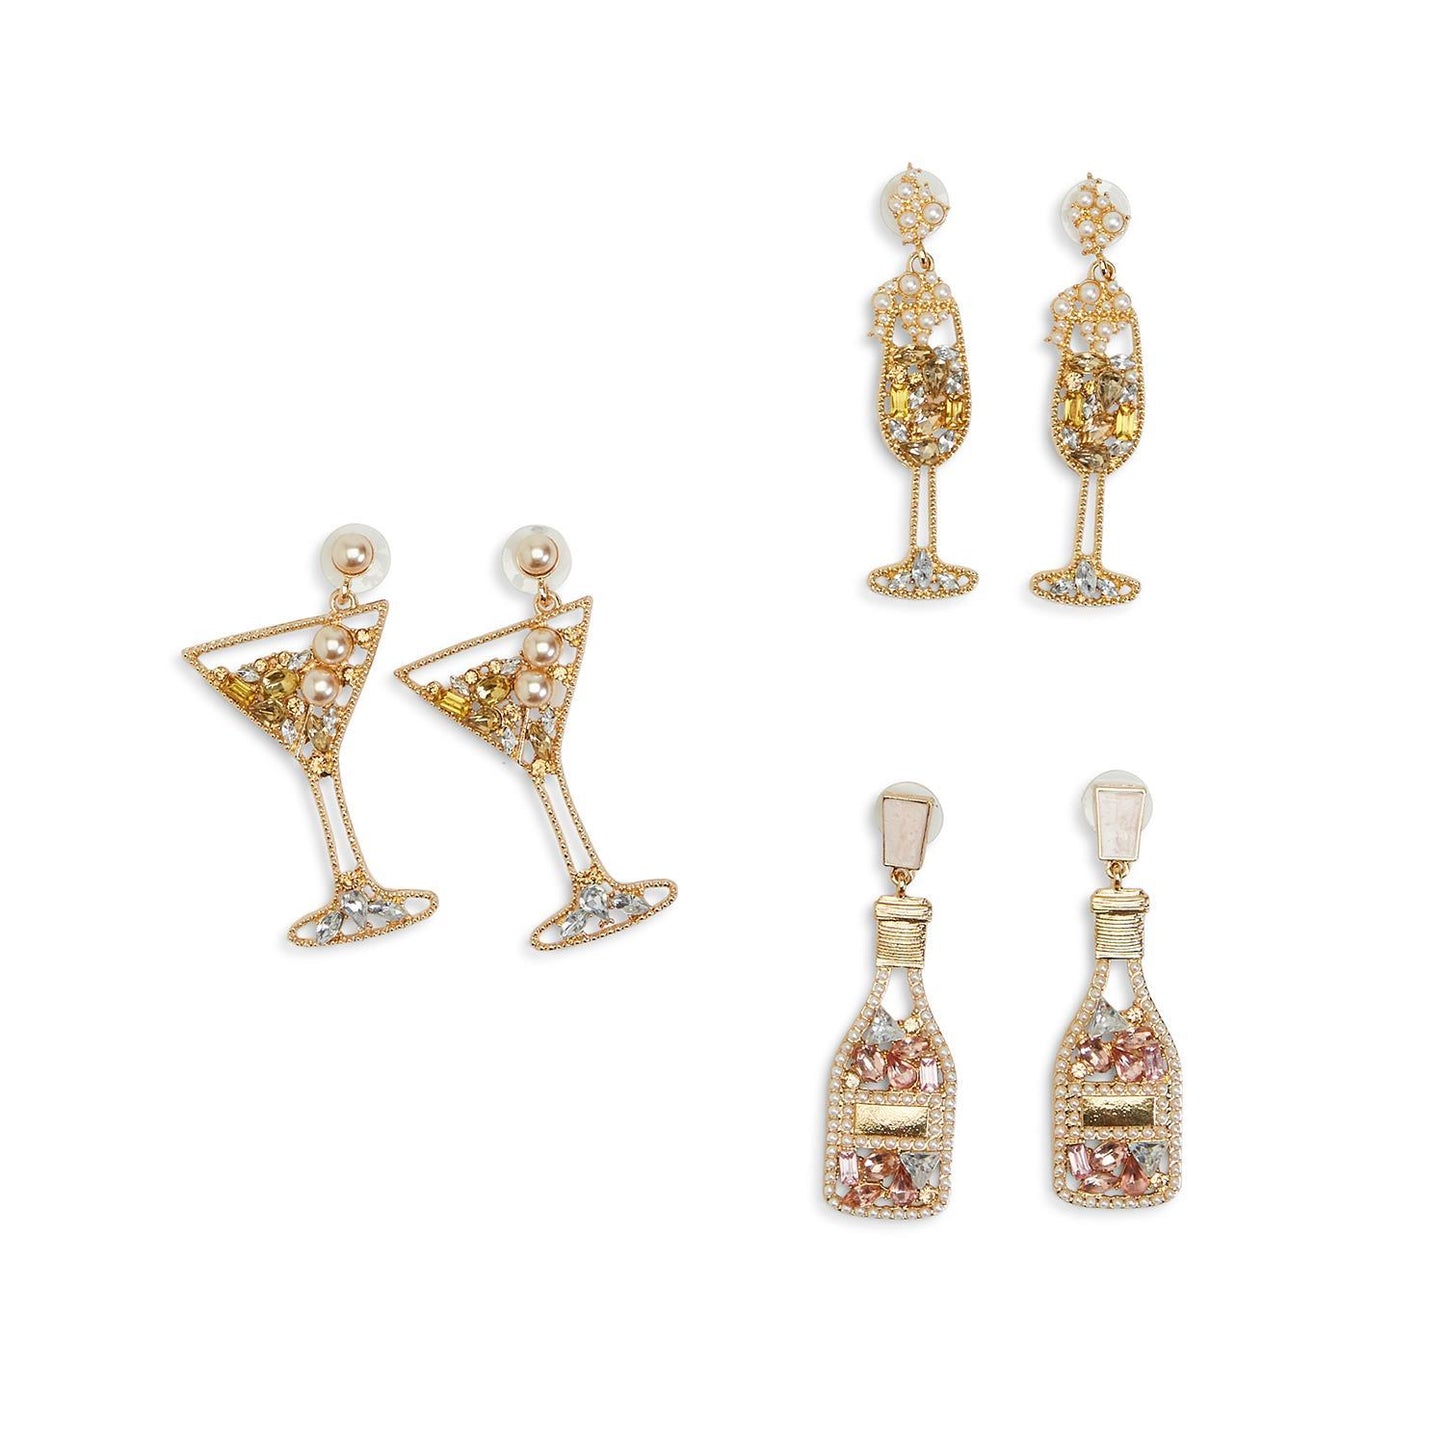 Crystal Embellished Earrings In Assorted Designs: Champagne Bottle, Champagne Glass, Martini Glass